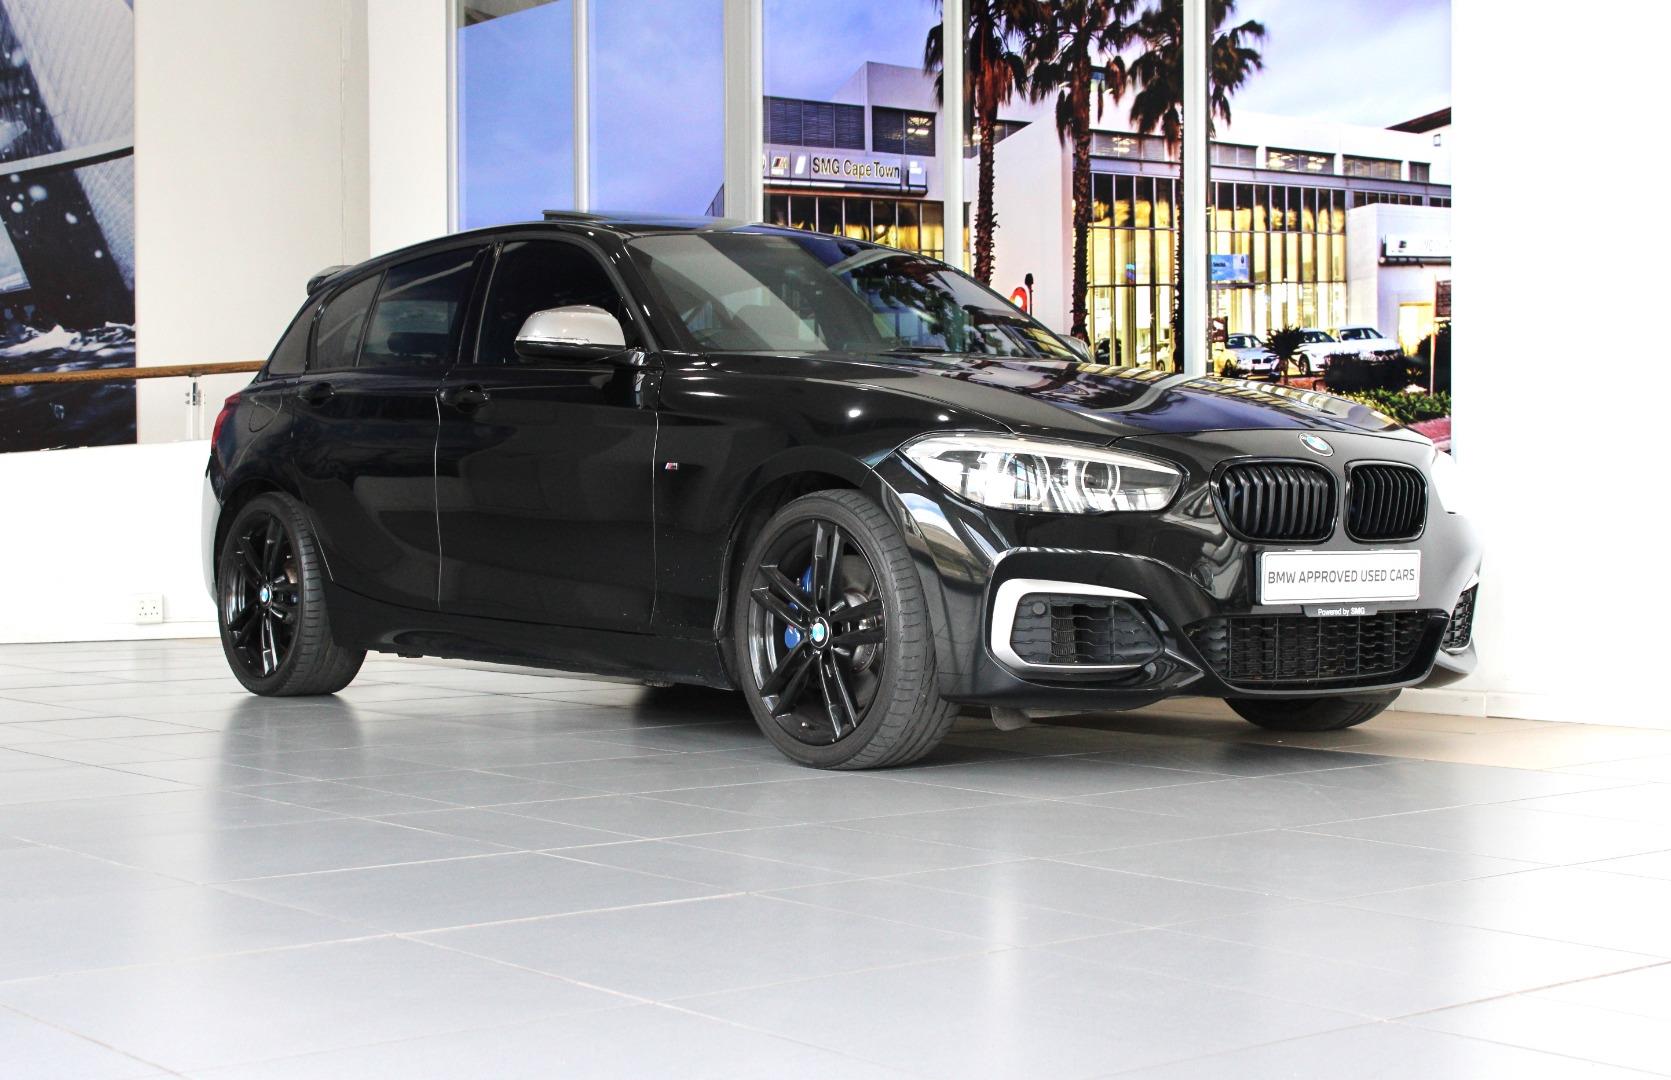 2018 BMW M140i EDITION M SPORT SHADOW 5DR A/T (F20) For Sale, city